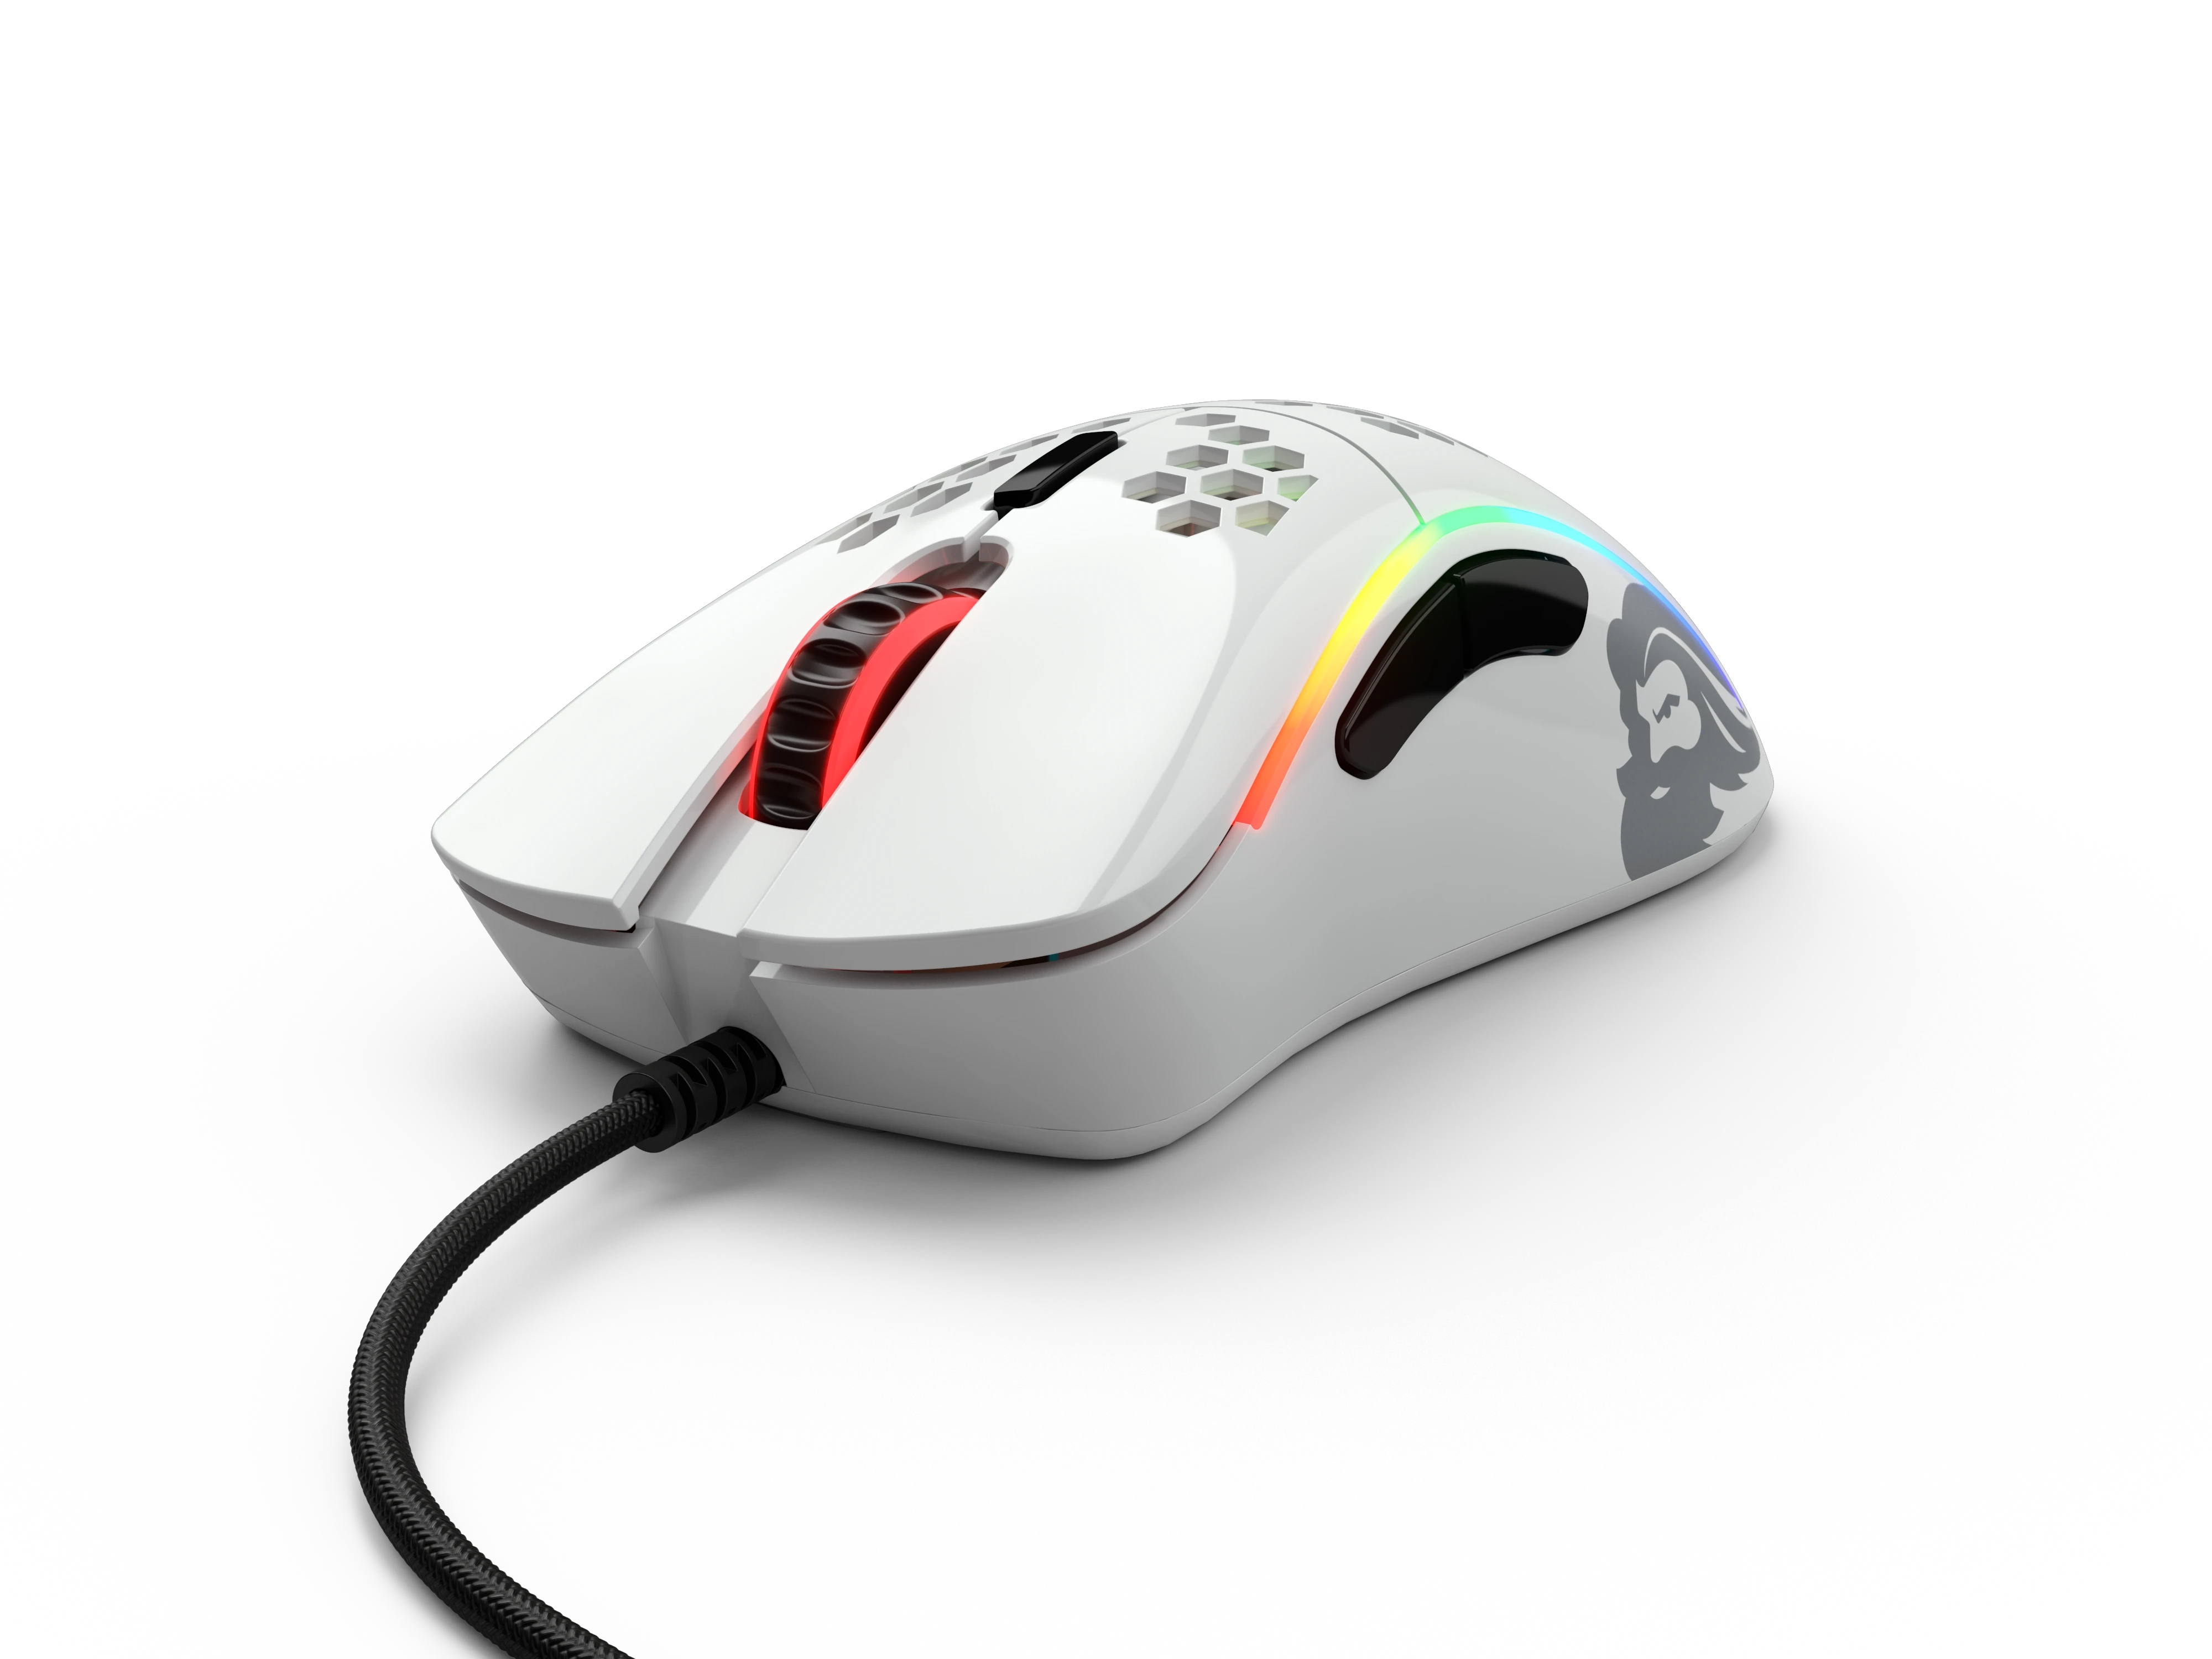 Glorious PC Gaming Race Model D- RGB Glossy White